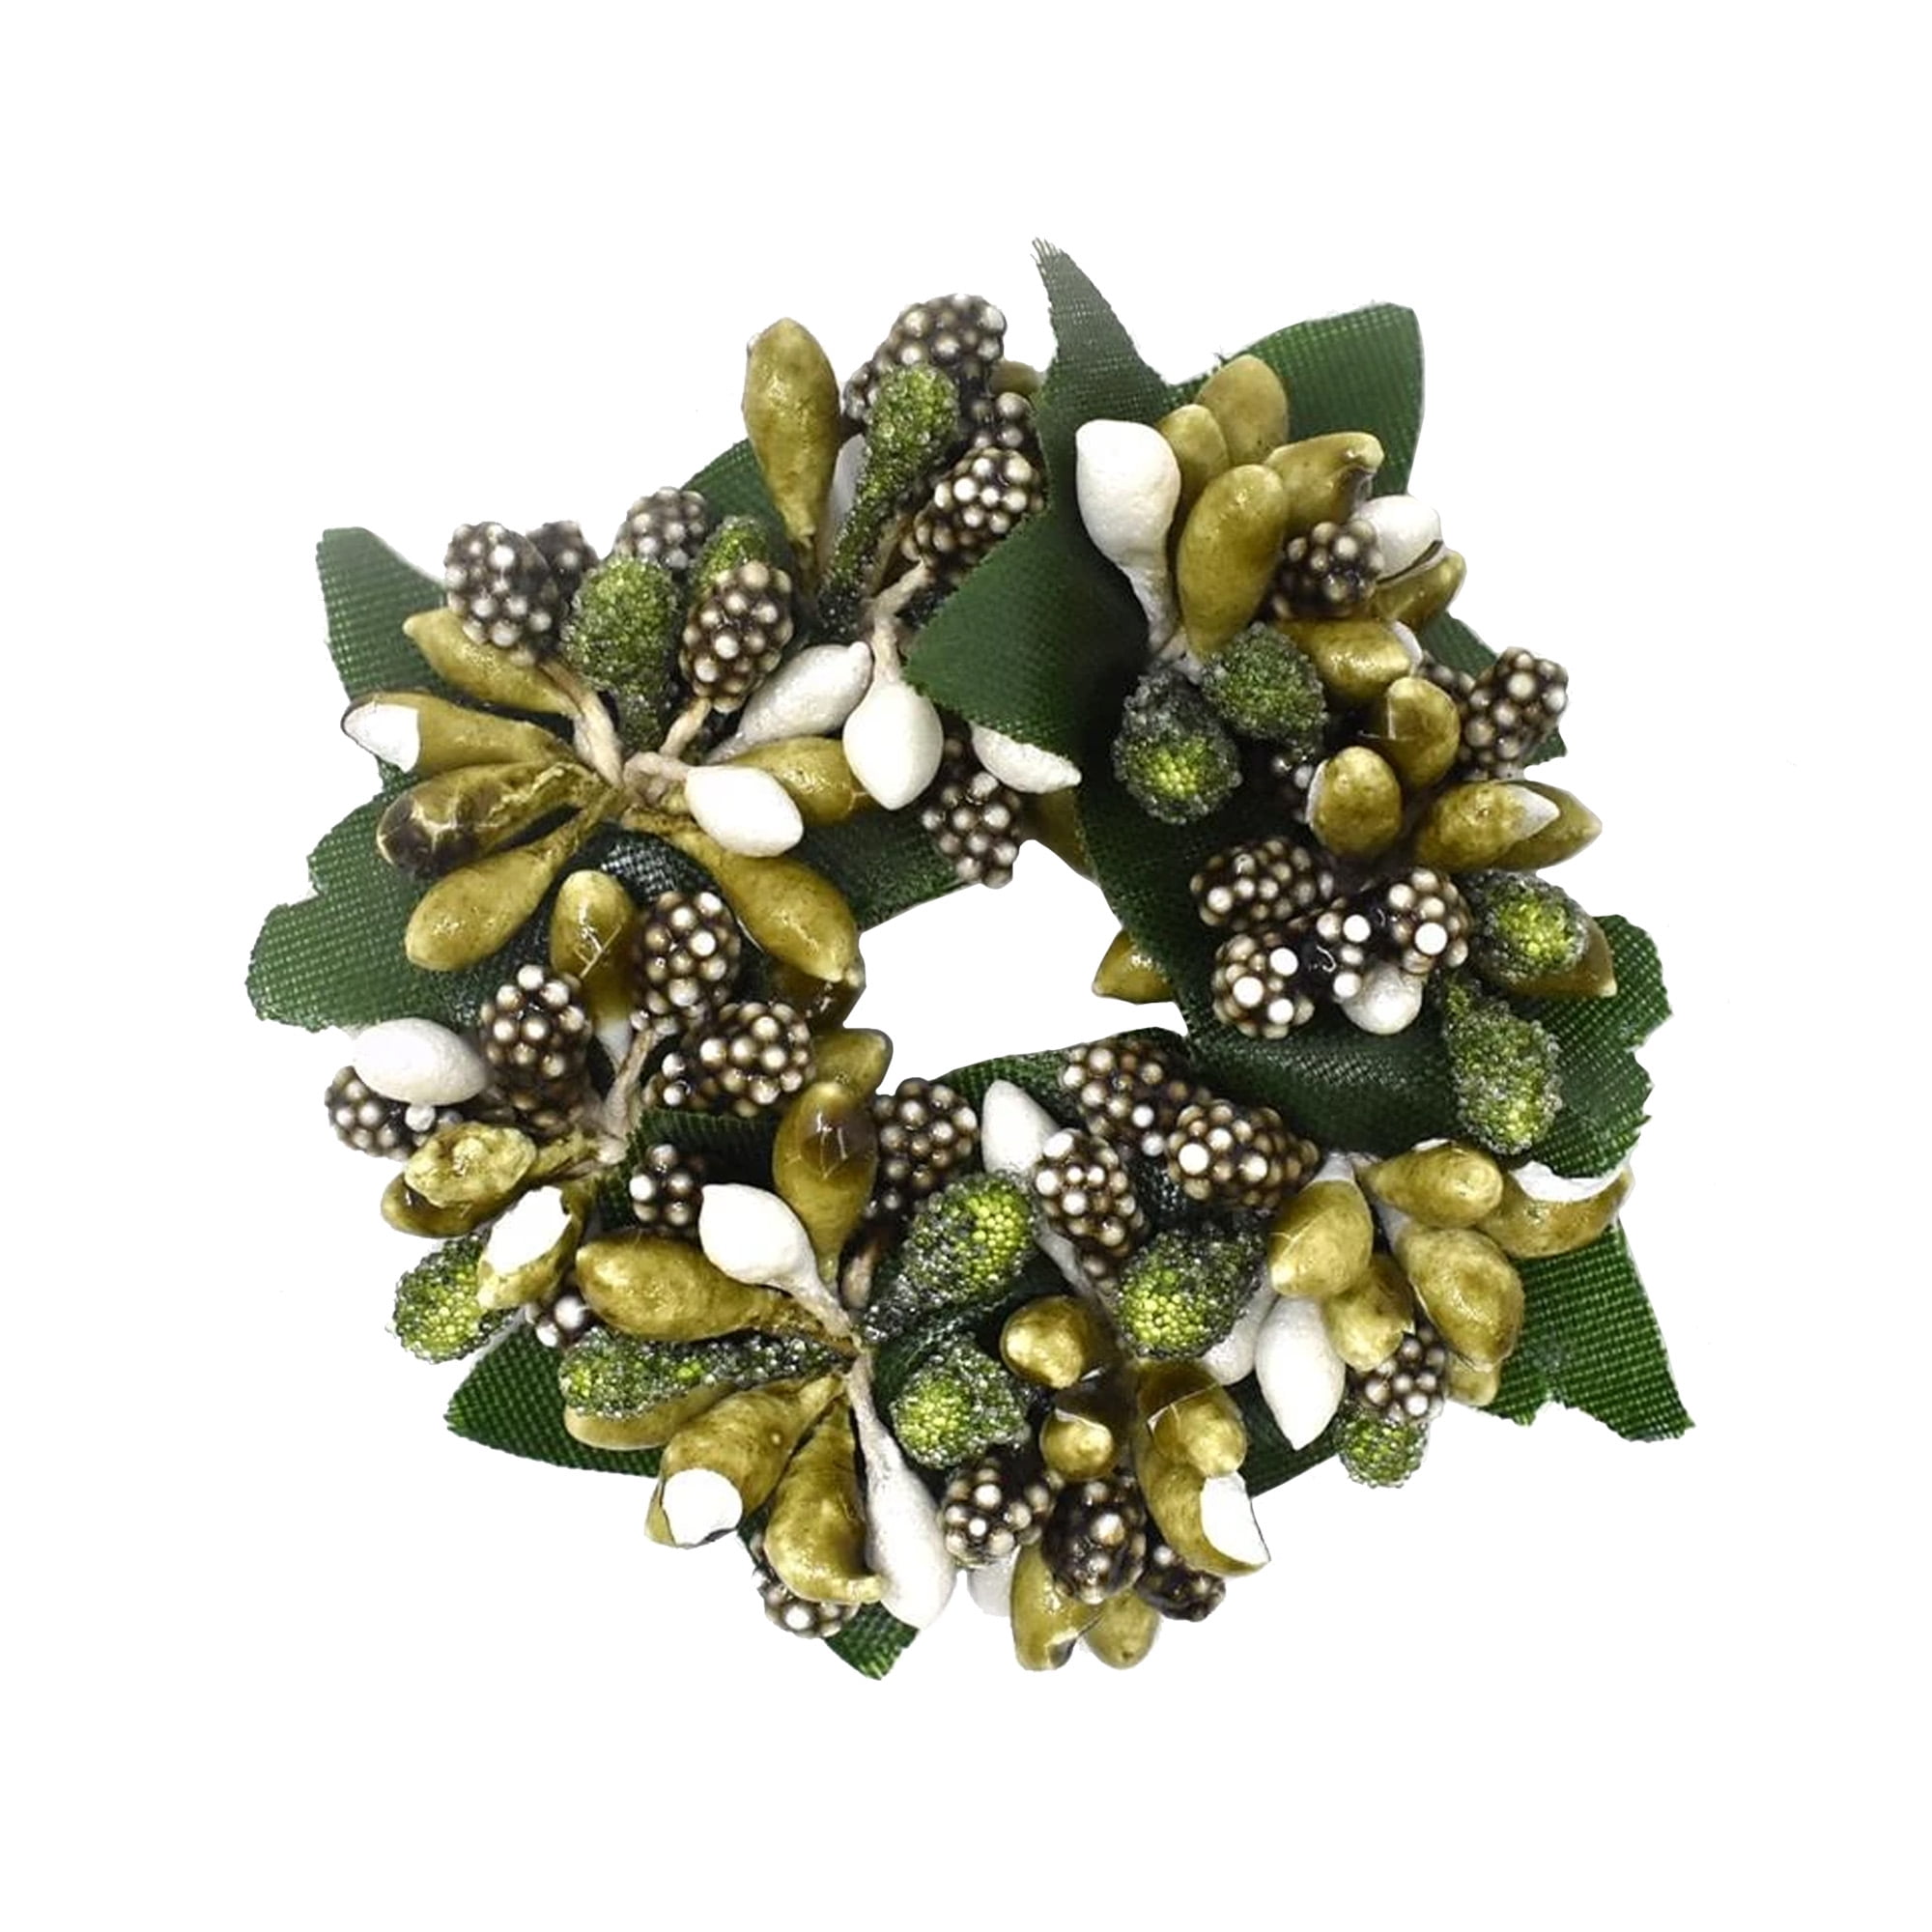 Decorative Green Berry Candle Ring 1-Inch 